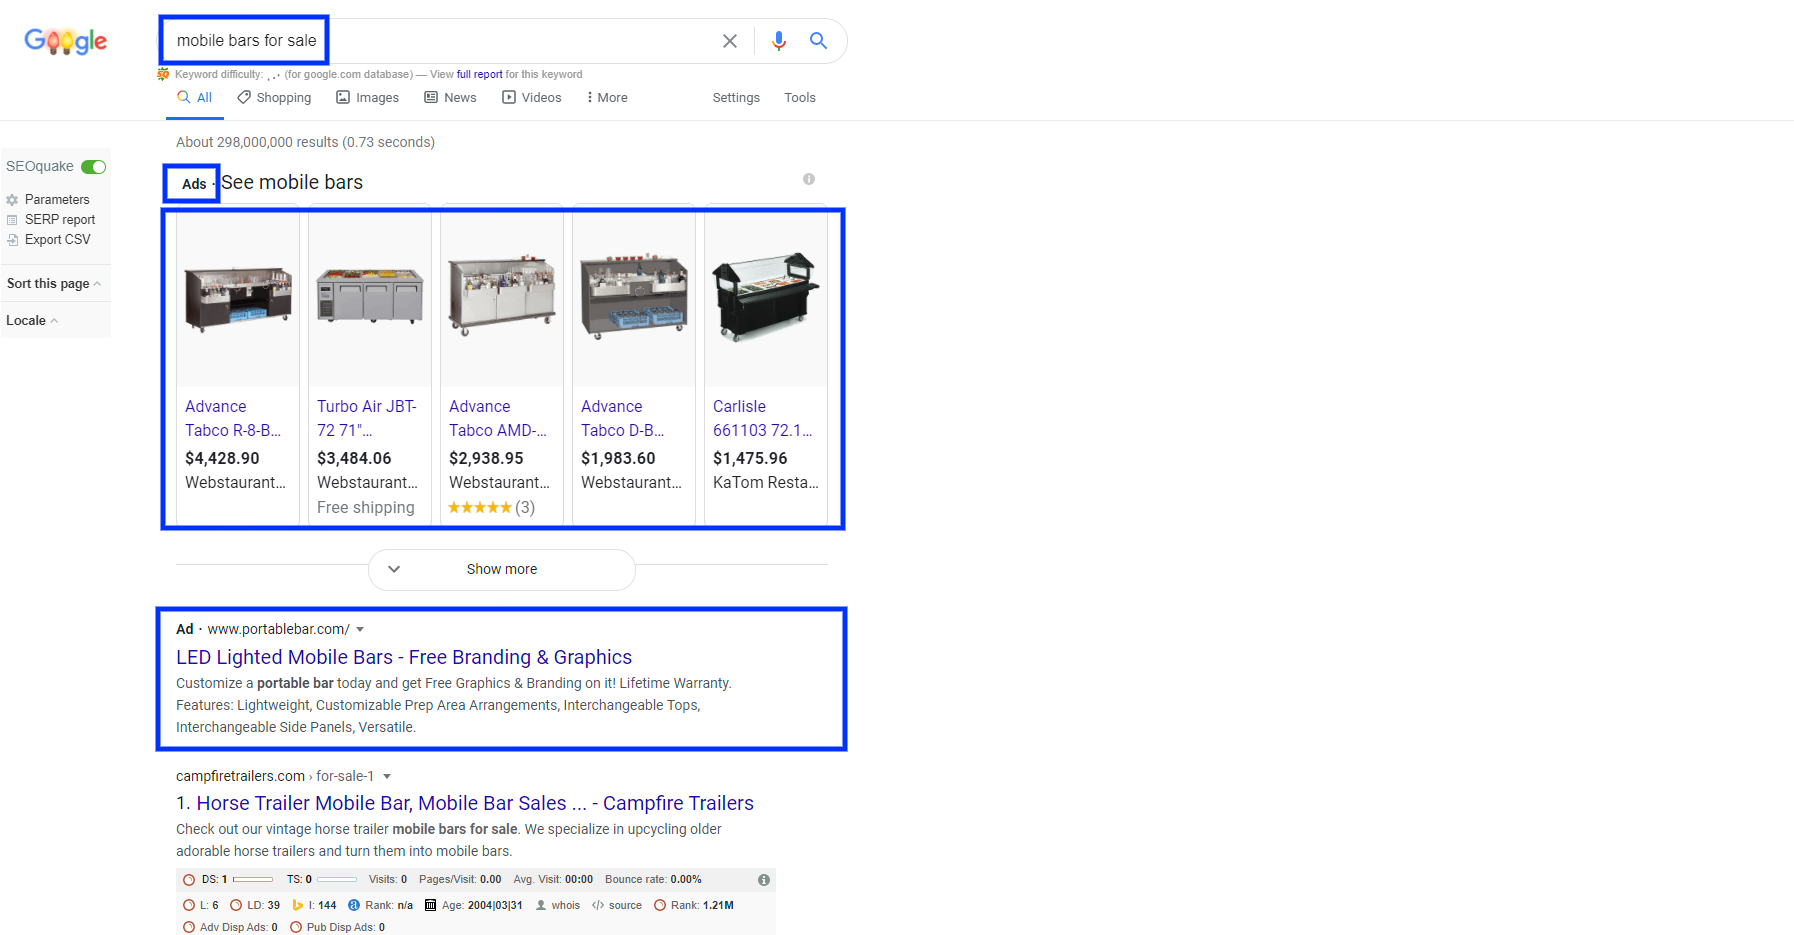 Here is a screenshot of paid search ads and product ads on the Google Ad Network.